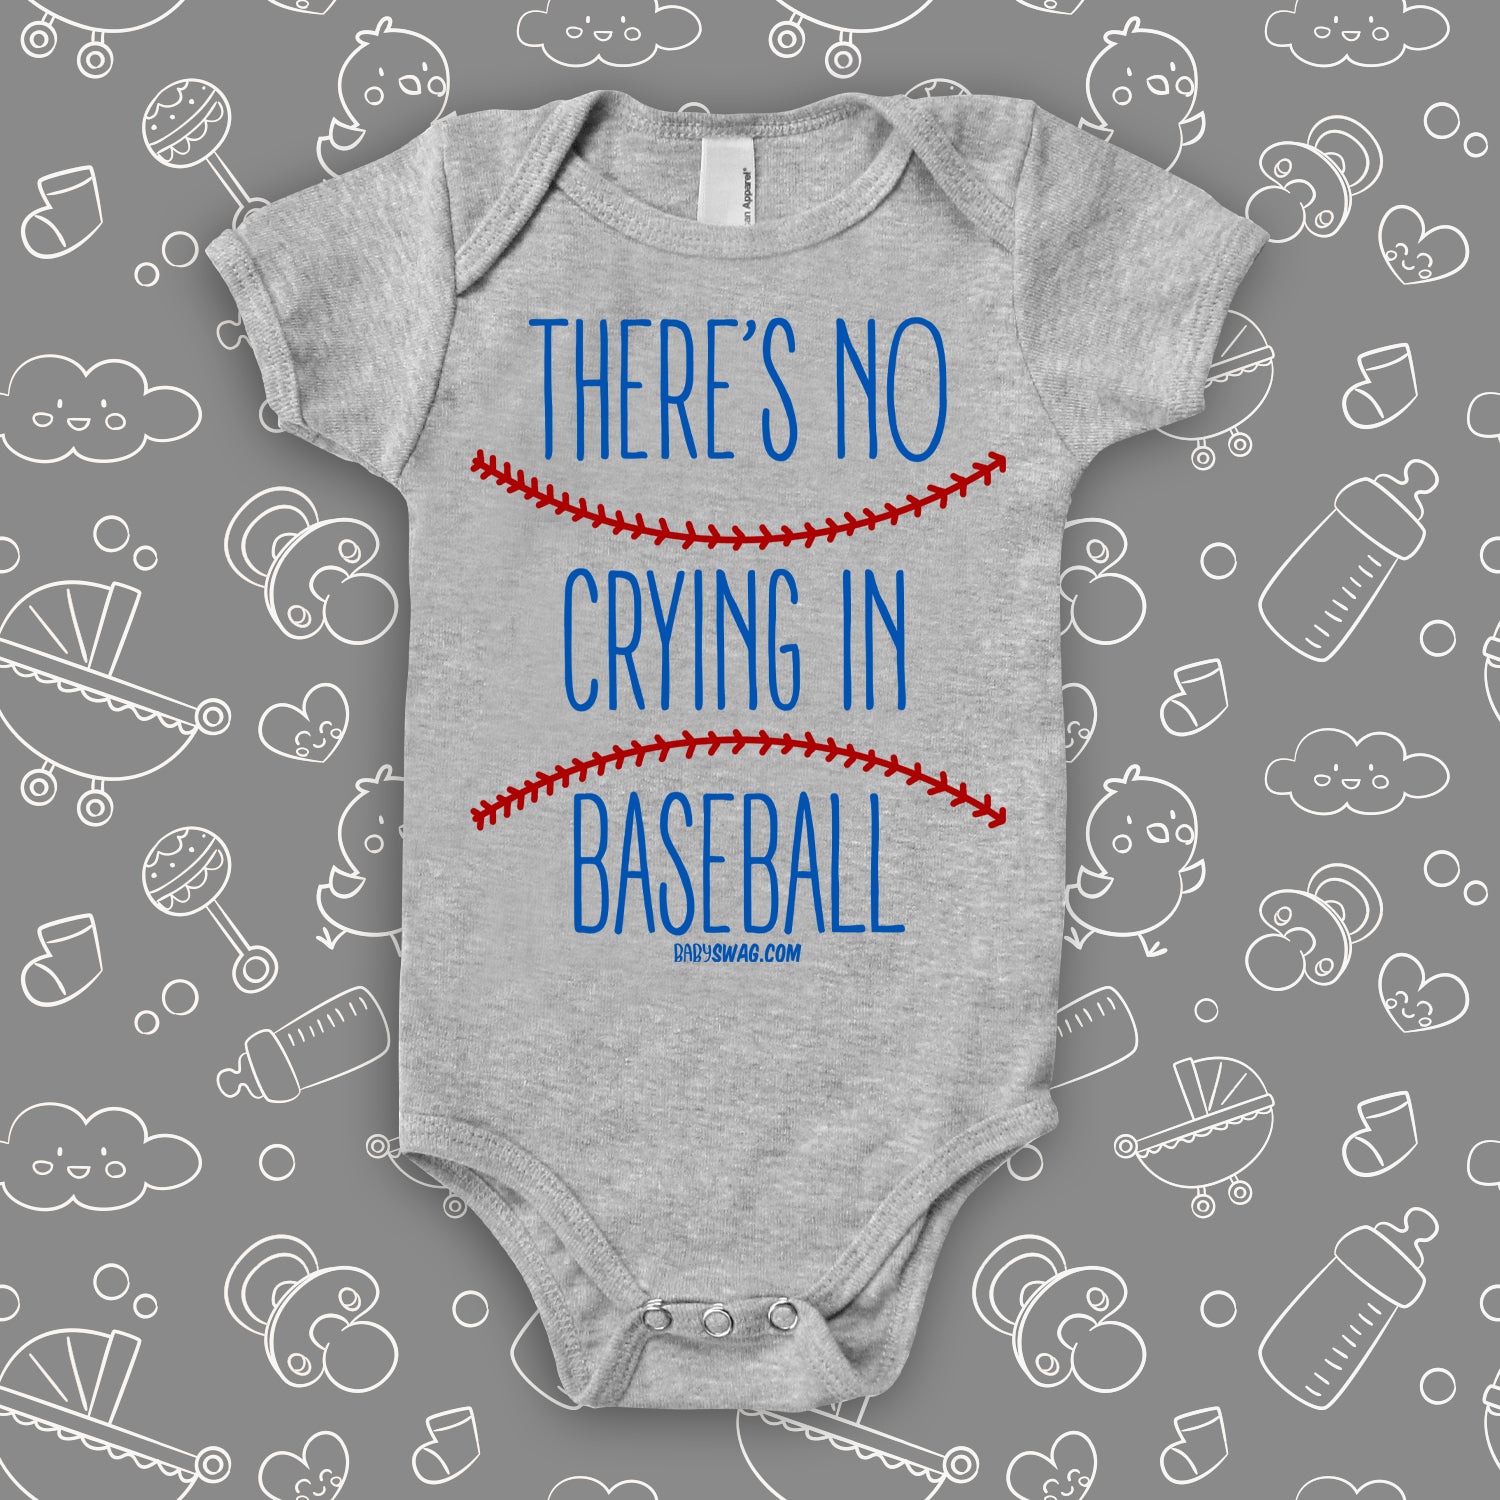 Cute baby boy onesies with saying "There's No Crying In Baseball" in grey. 